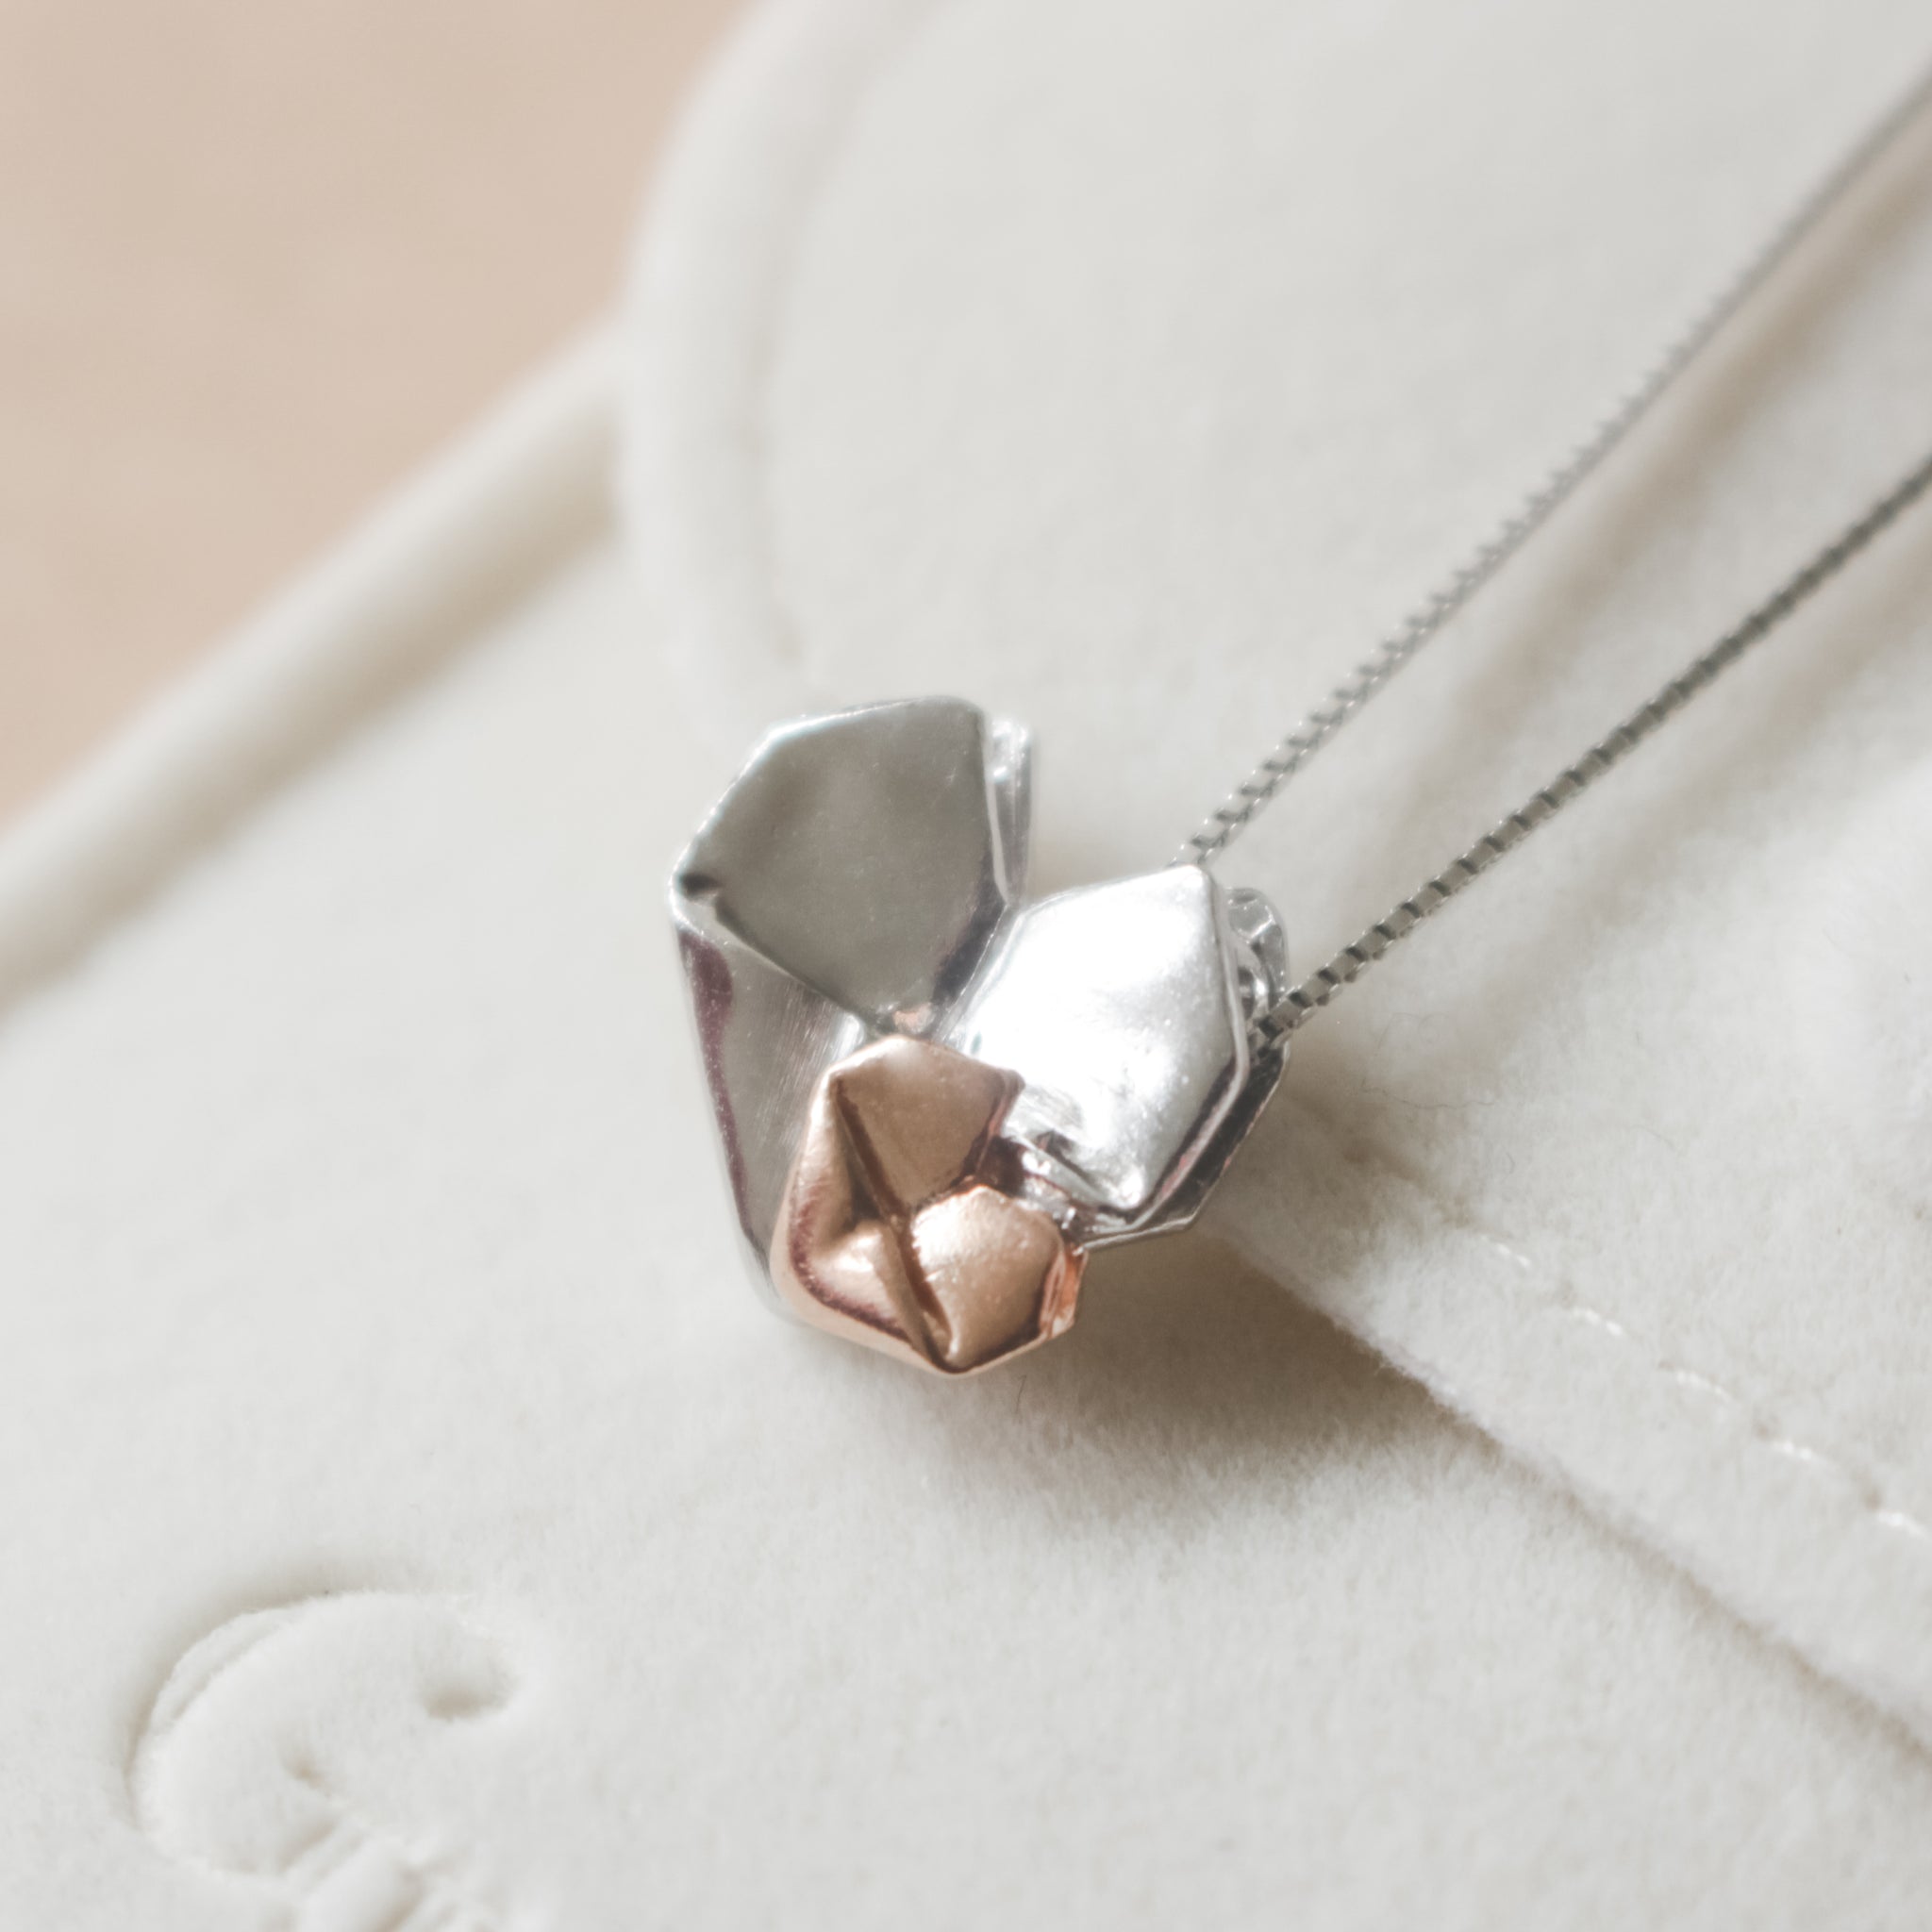 Dual Color Silver Origami Heart Necklace - Mother's Love (Silver and Rose Gold)